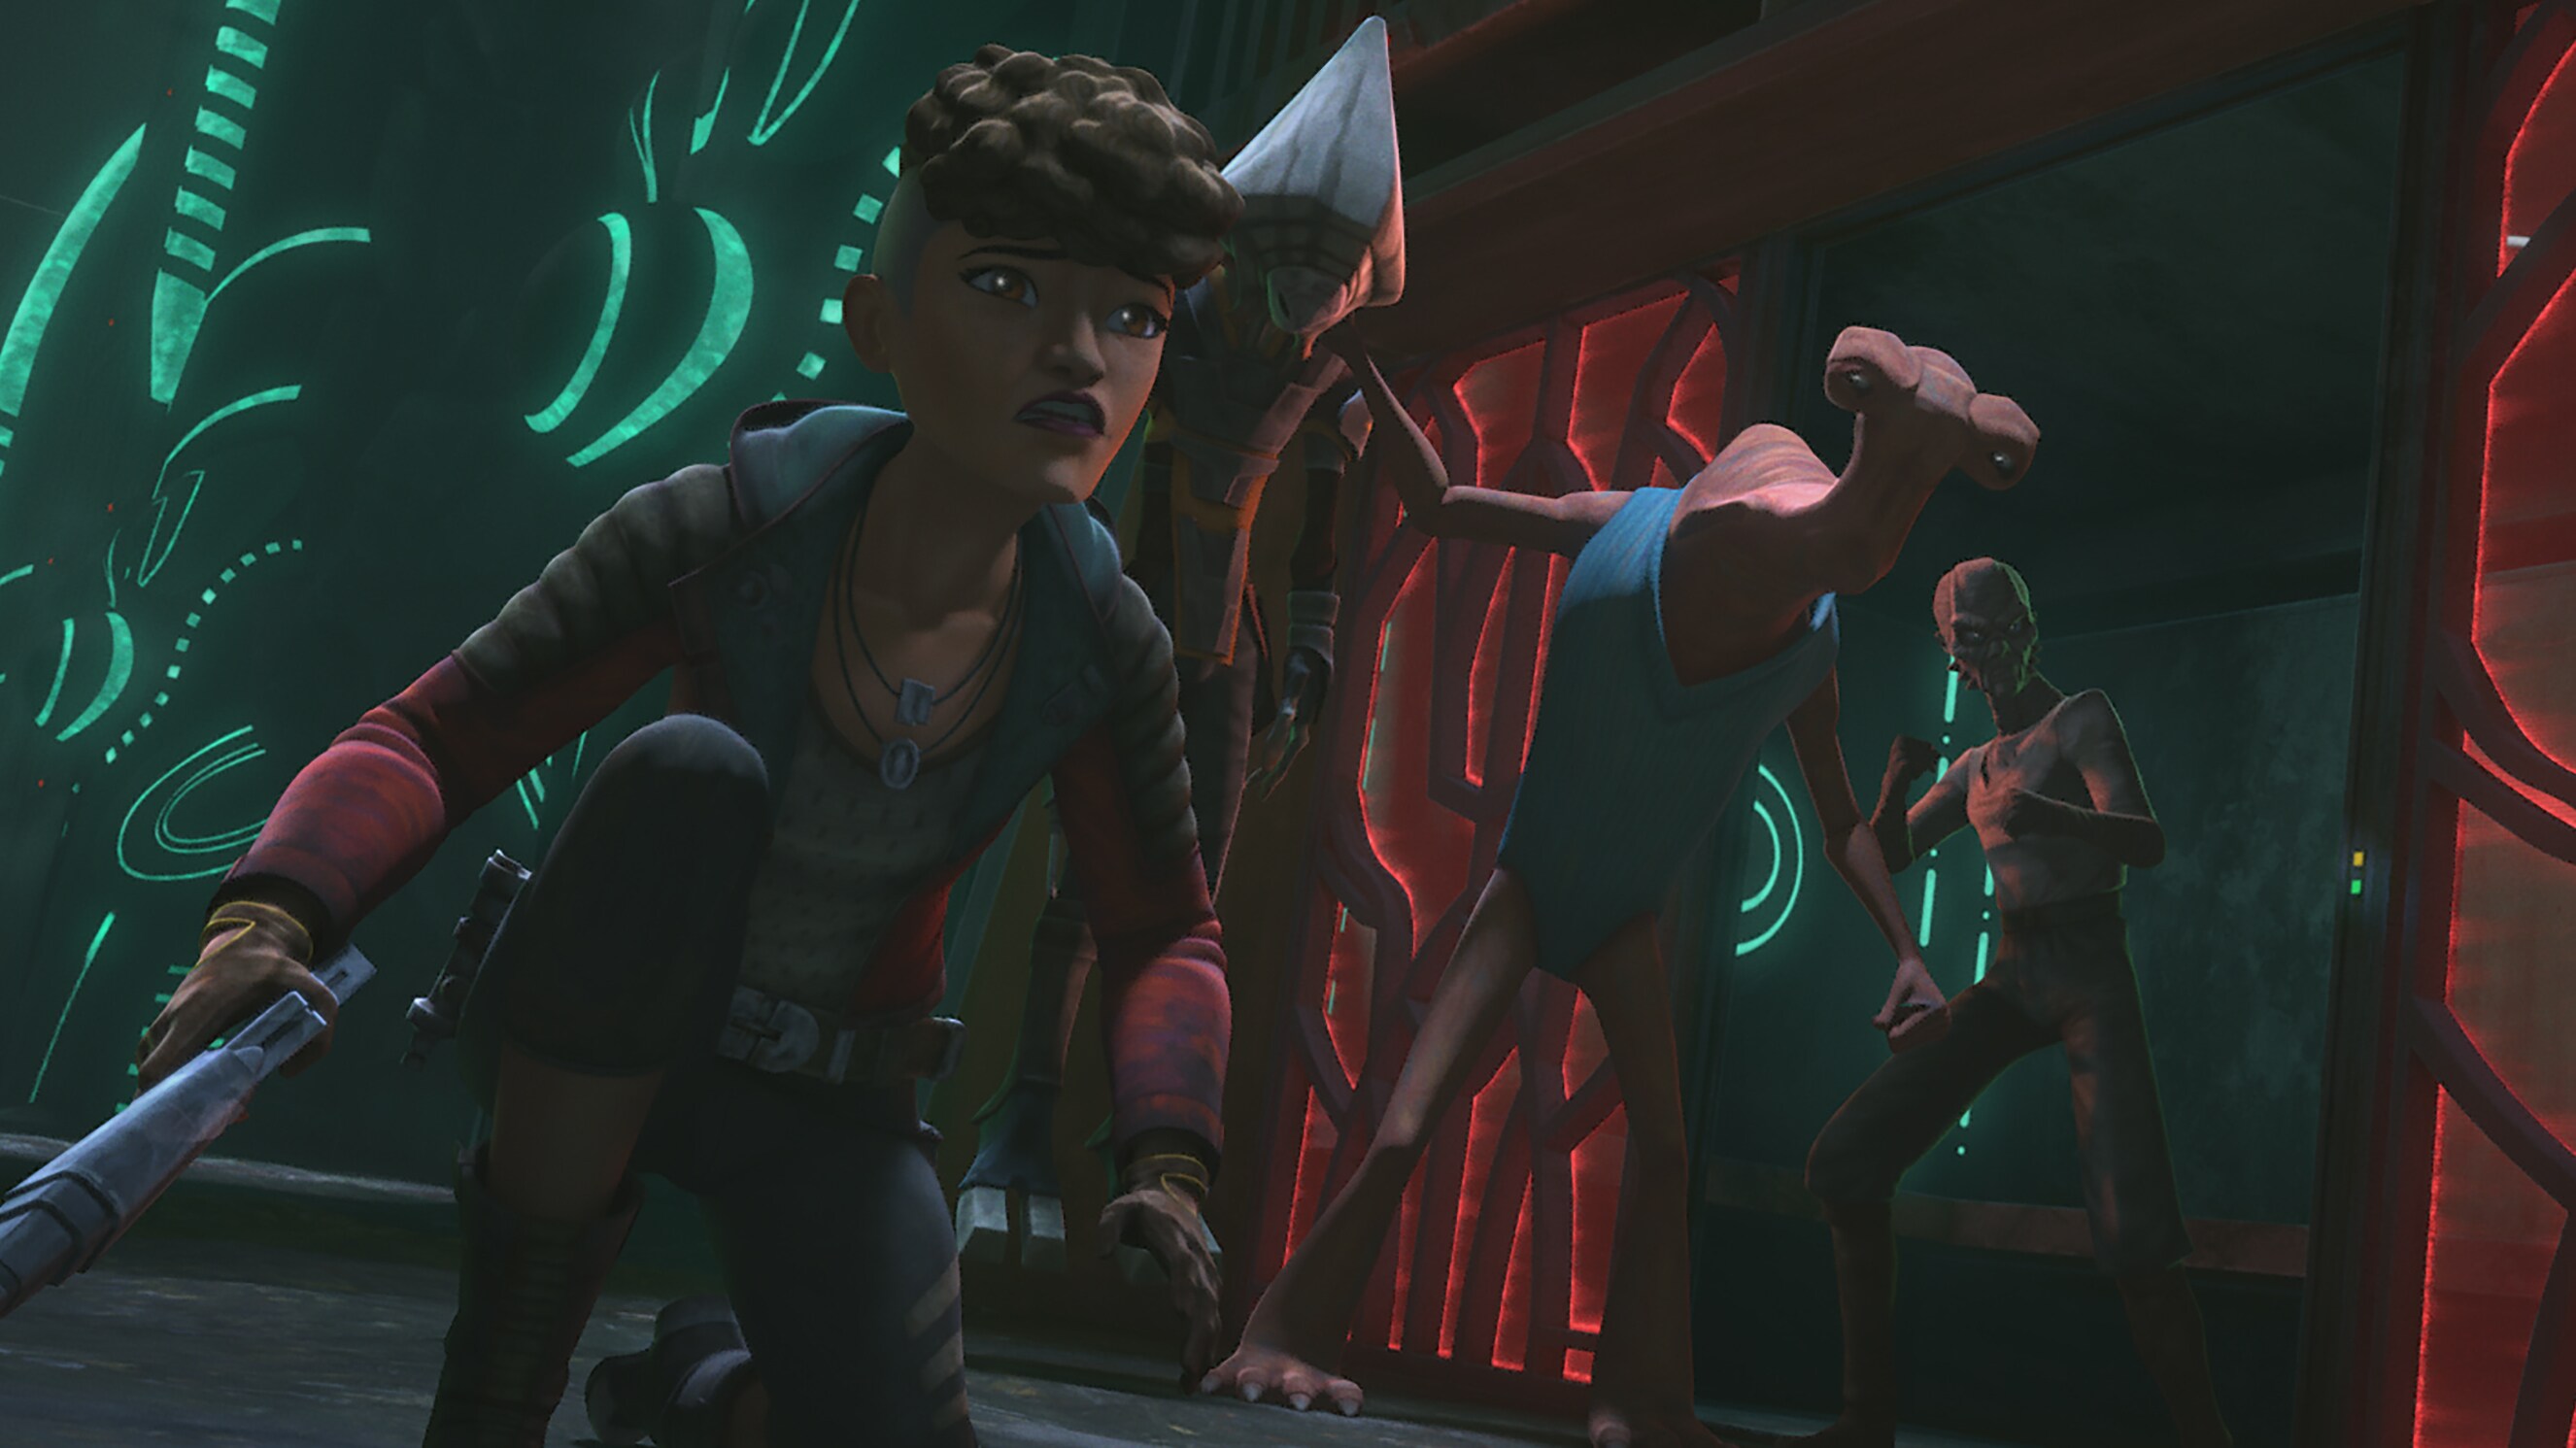 Trace tries to escape from the Pikes in STAR WARS: THE CLONE WARS, exclusively on Disney+.